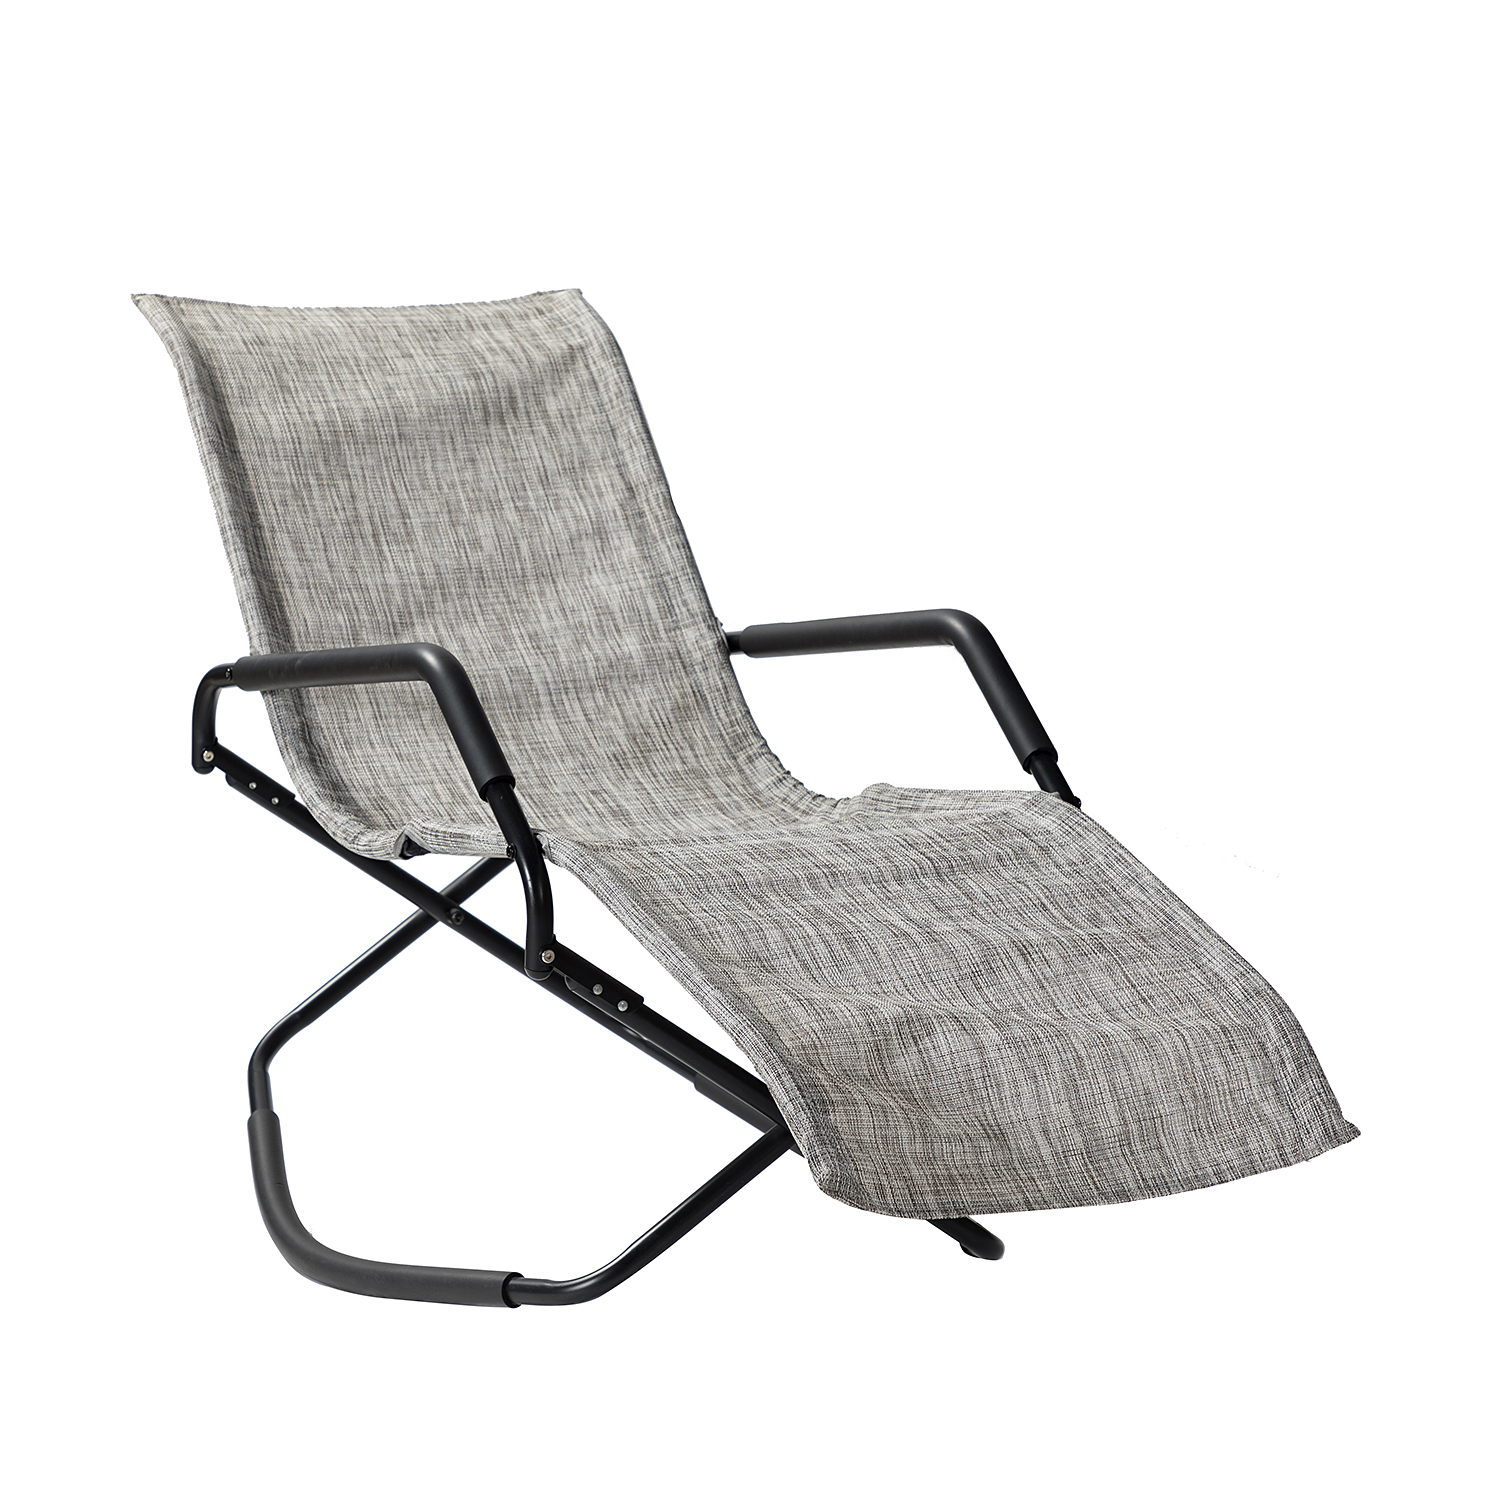 Folding Lounge Chair, Patio Rocking Chaise Chair with Armrests, Beach Lightweight Reclining Chair, Outdoor Portable Folding Chair, Lounge Chaise Chair for Camping, Pool, Lawn, Garden, D7843 - image 2 of 10